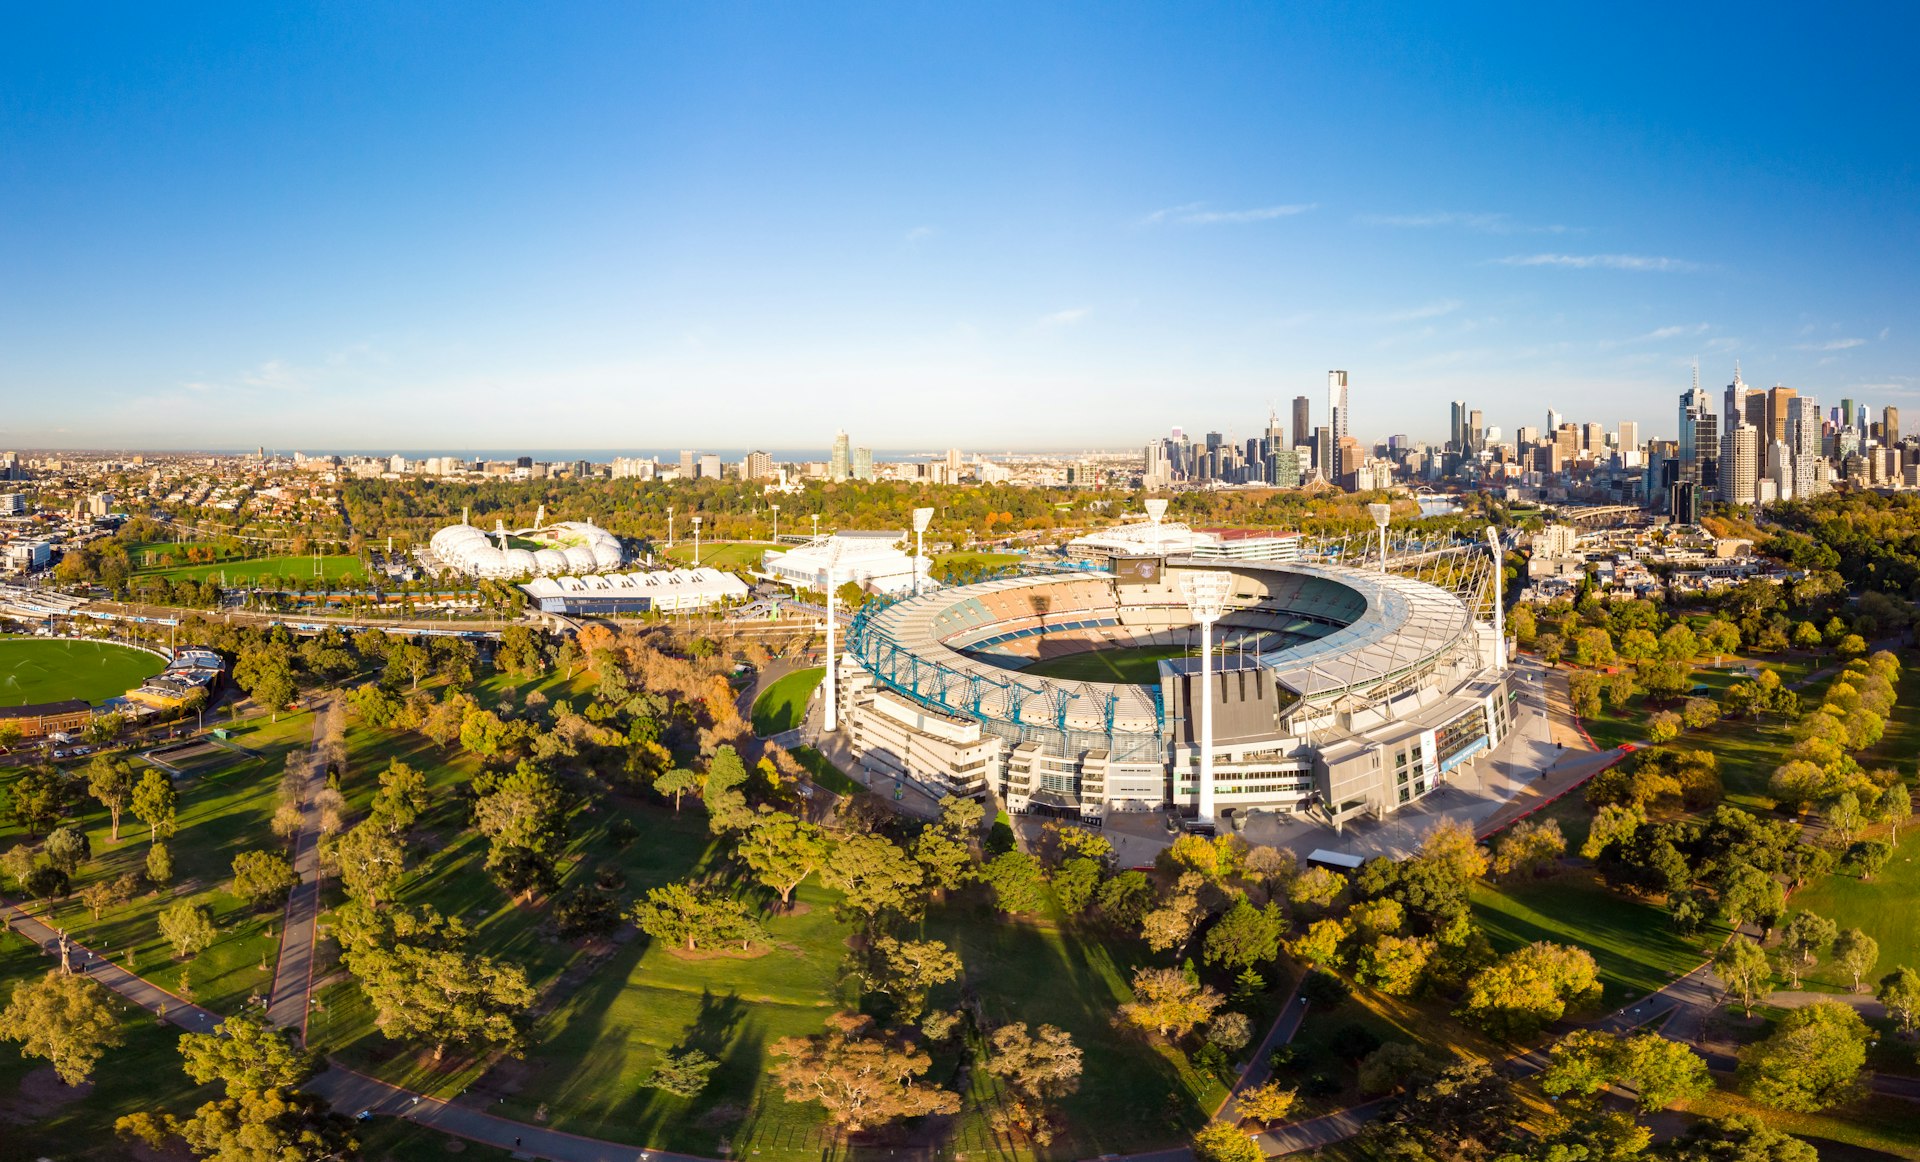 Melbourne's famous skyline with Melbourne Cricket Ground stadium in the foreground on a cool autumn morning in Melbourne, Victoria, Australia.